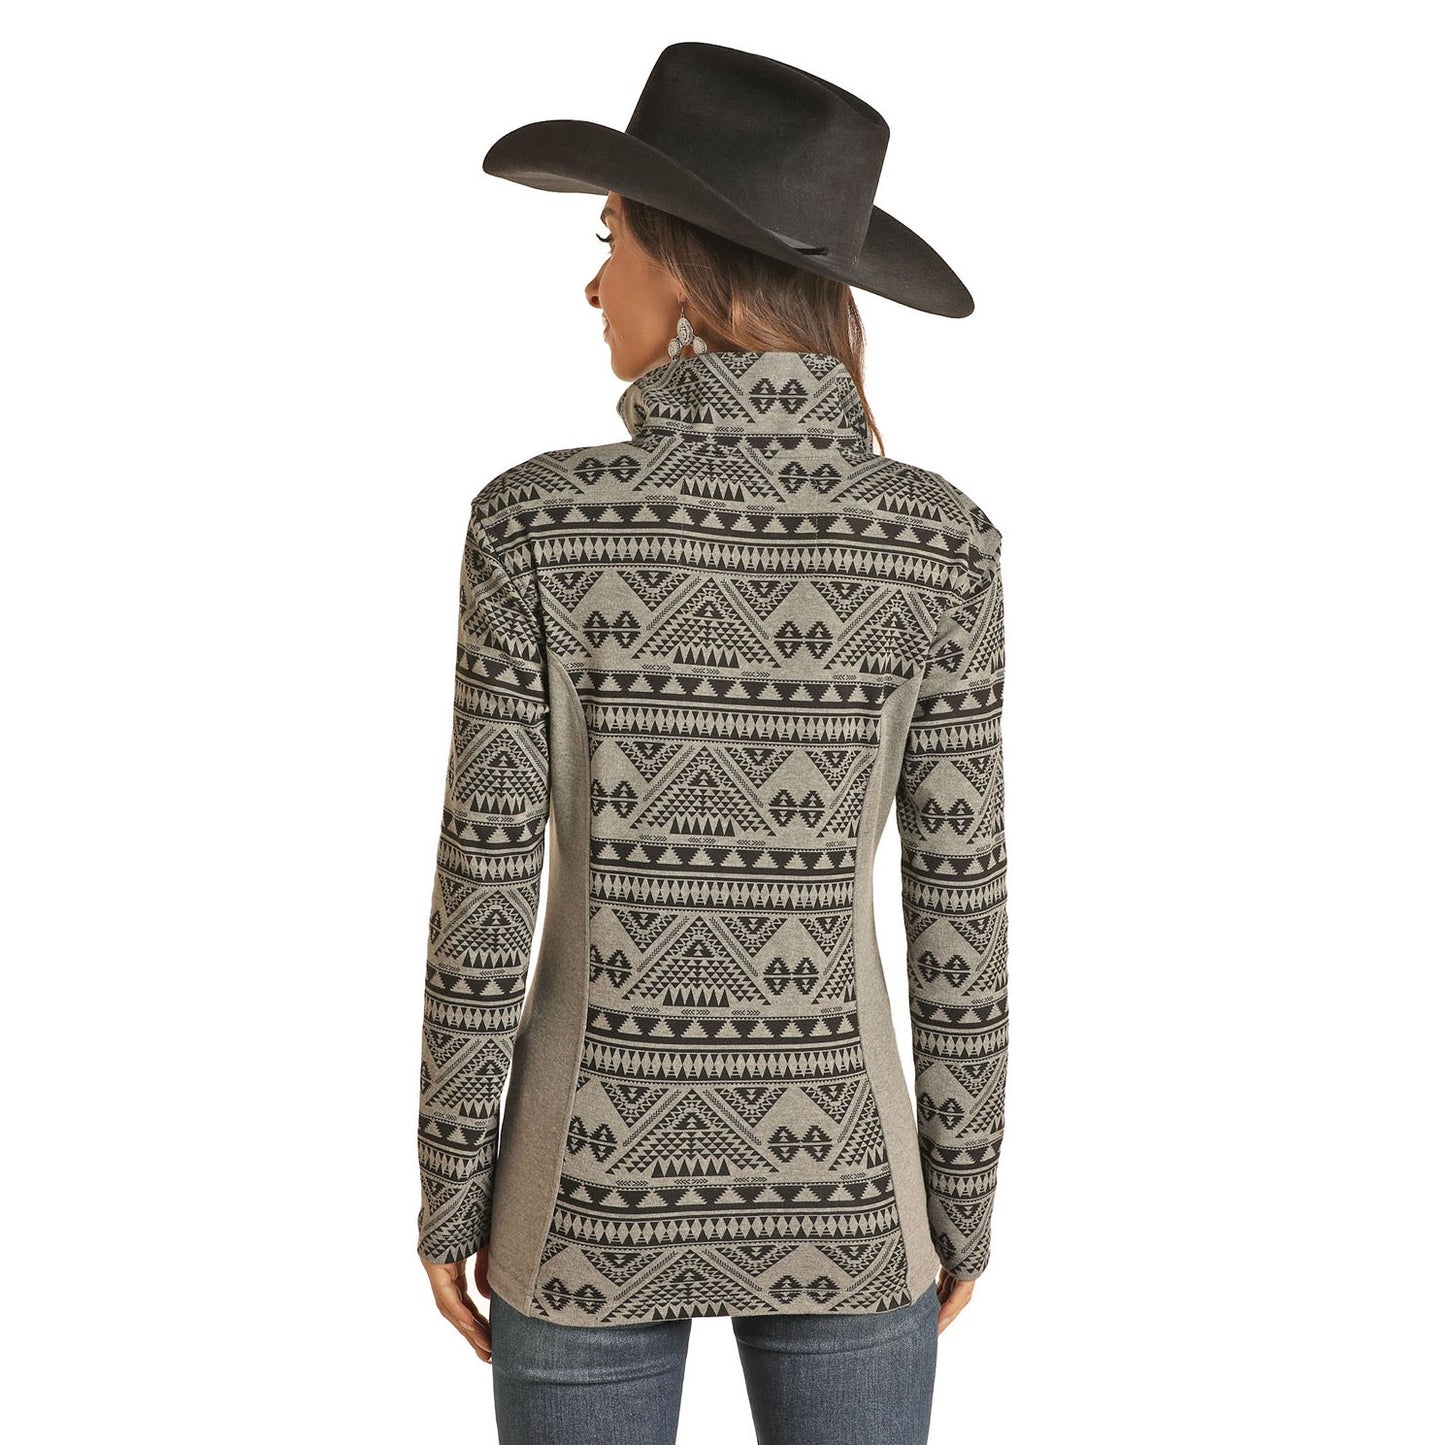 Powder River Outfitters Ladies Aztec Knit Henley Pullover 51-1035-01